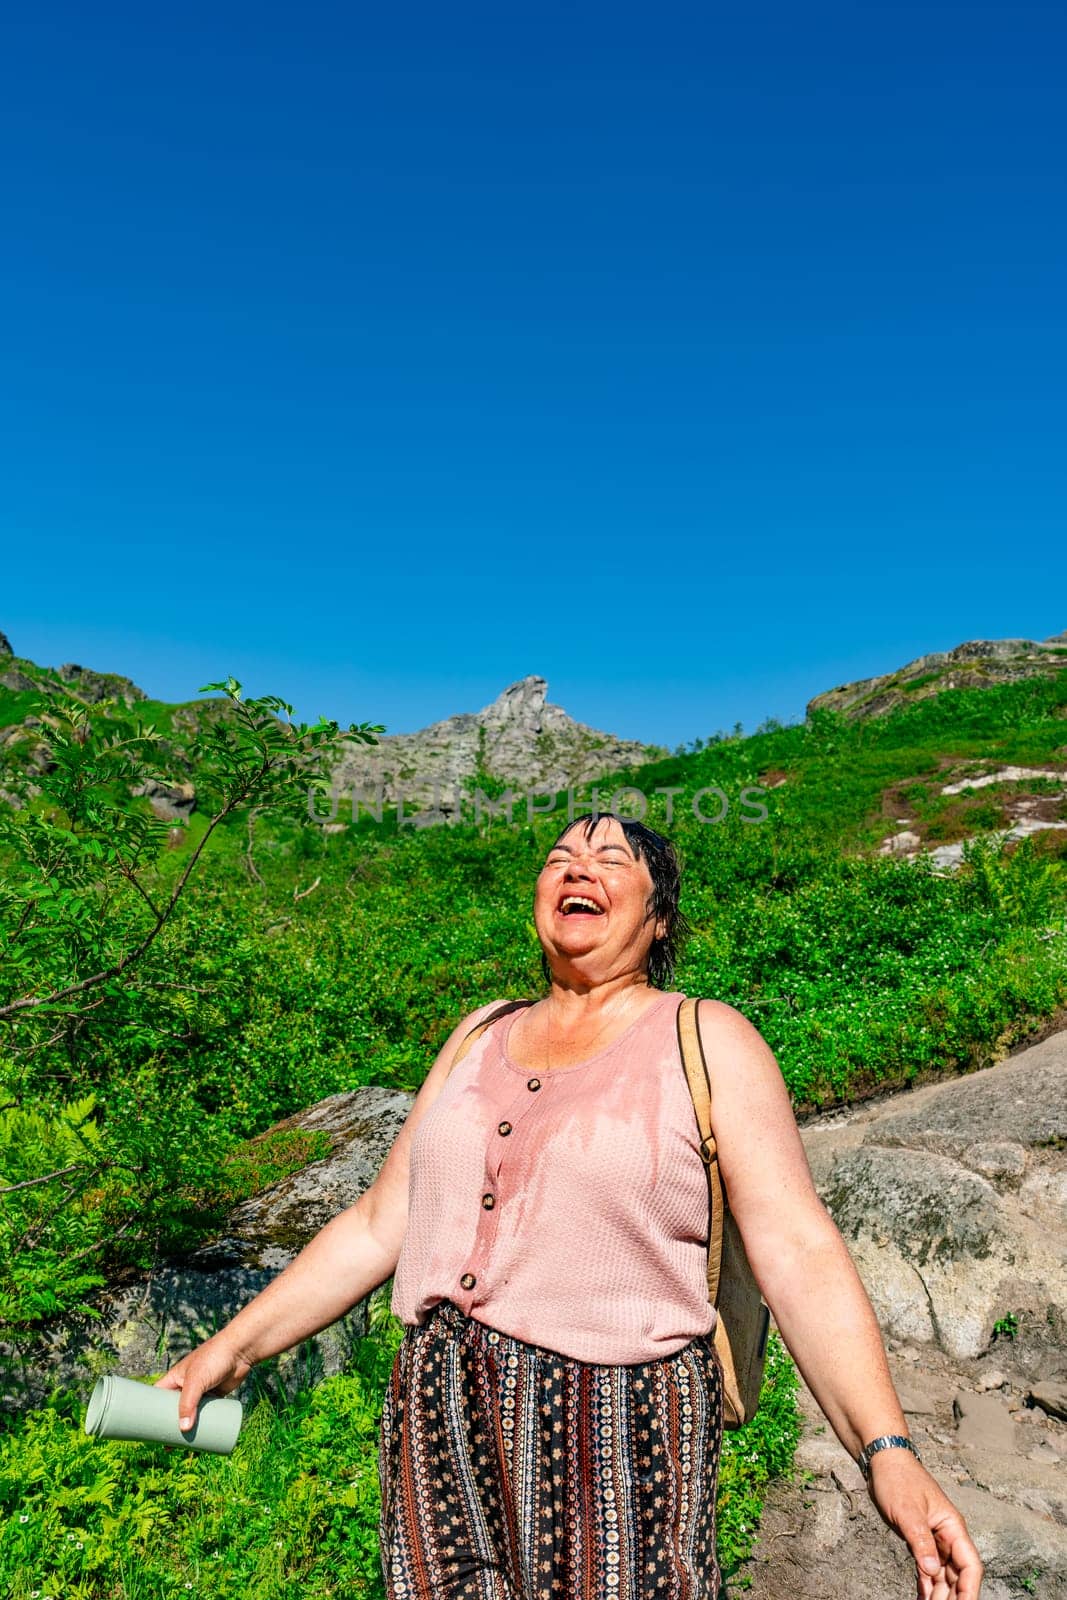 A tourist embraces a mountain escape by cooling down with cold water on a hot sunny day. The scenic beauty of the mountains creates a sense of tranquility and relaxation.